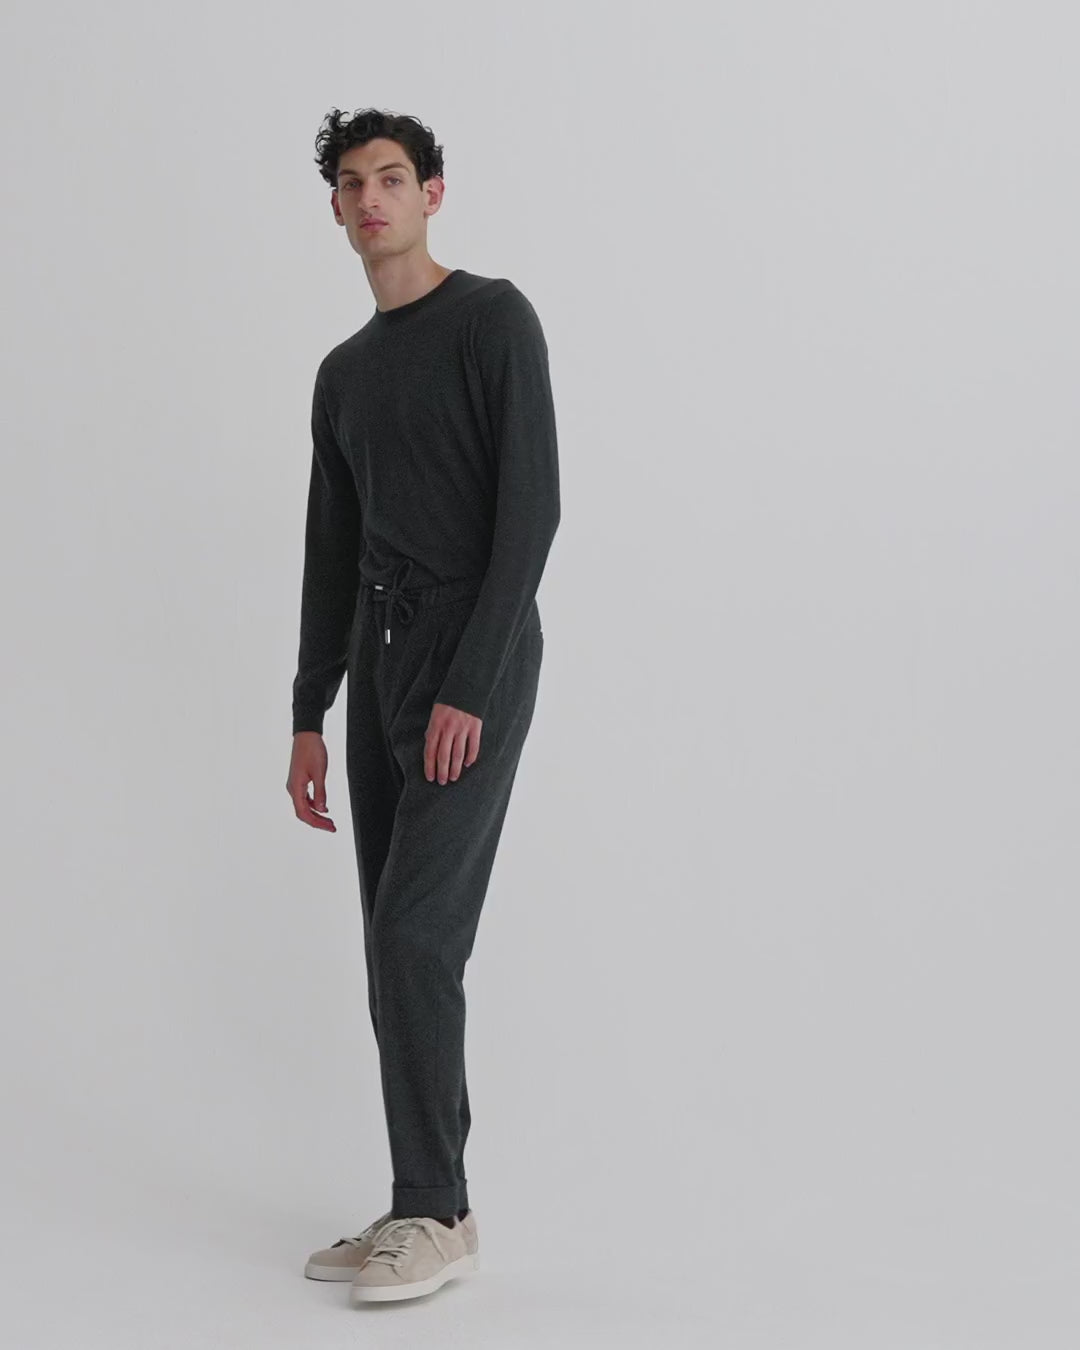 Flannel Casual Tailored Trousers Charcoal Model Video